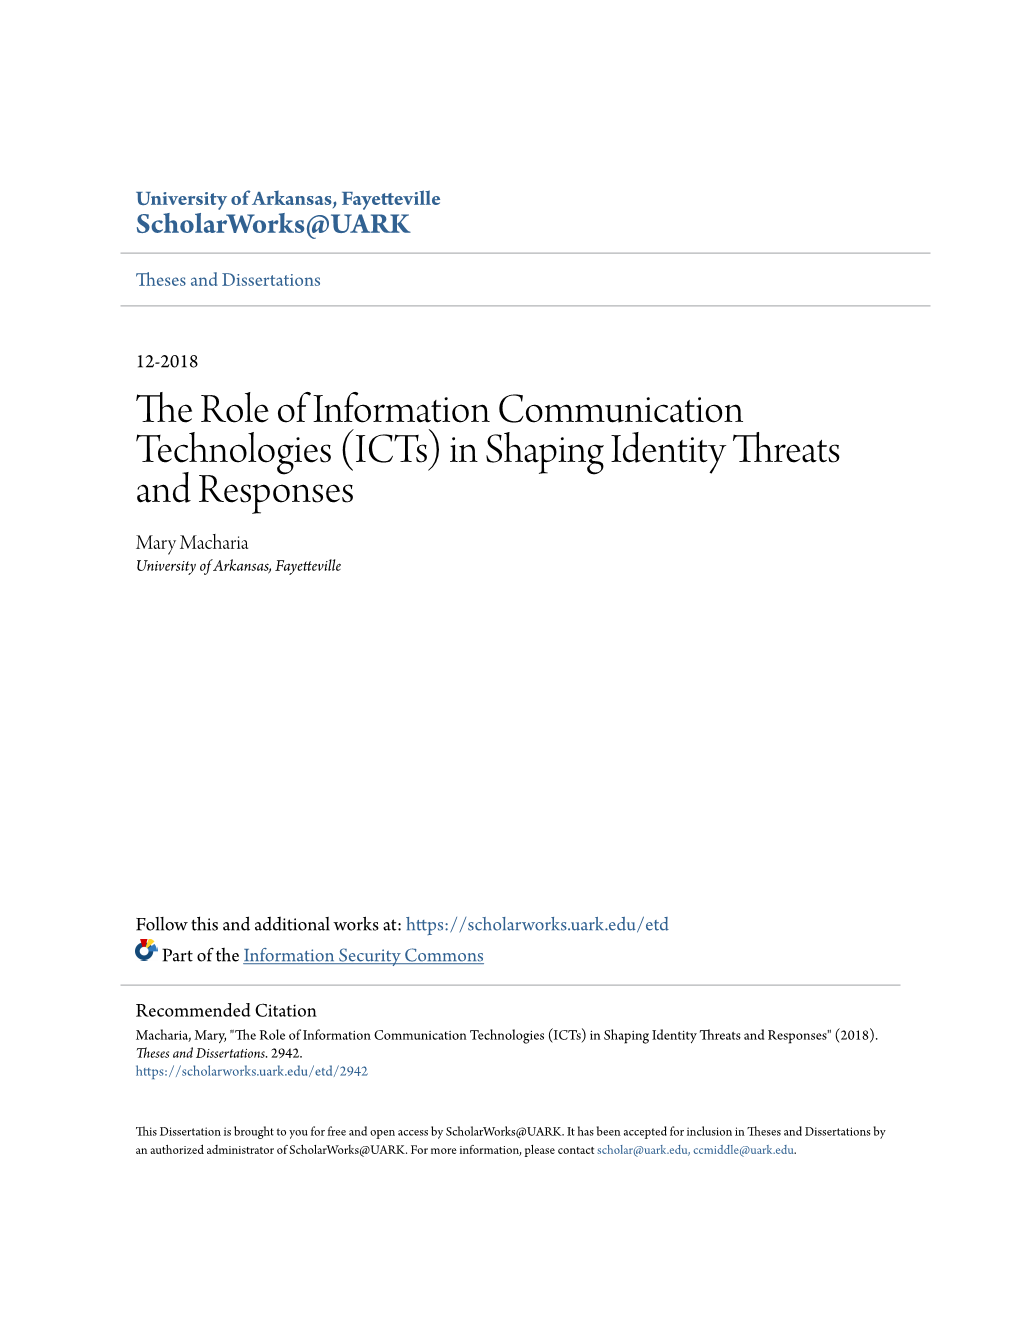 (Icts) in Shaping Identity Threats and Responses Mary Macharia University of Arkansas, Fayetteville